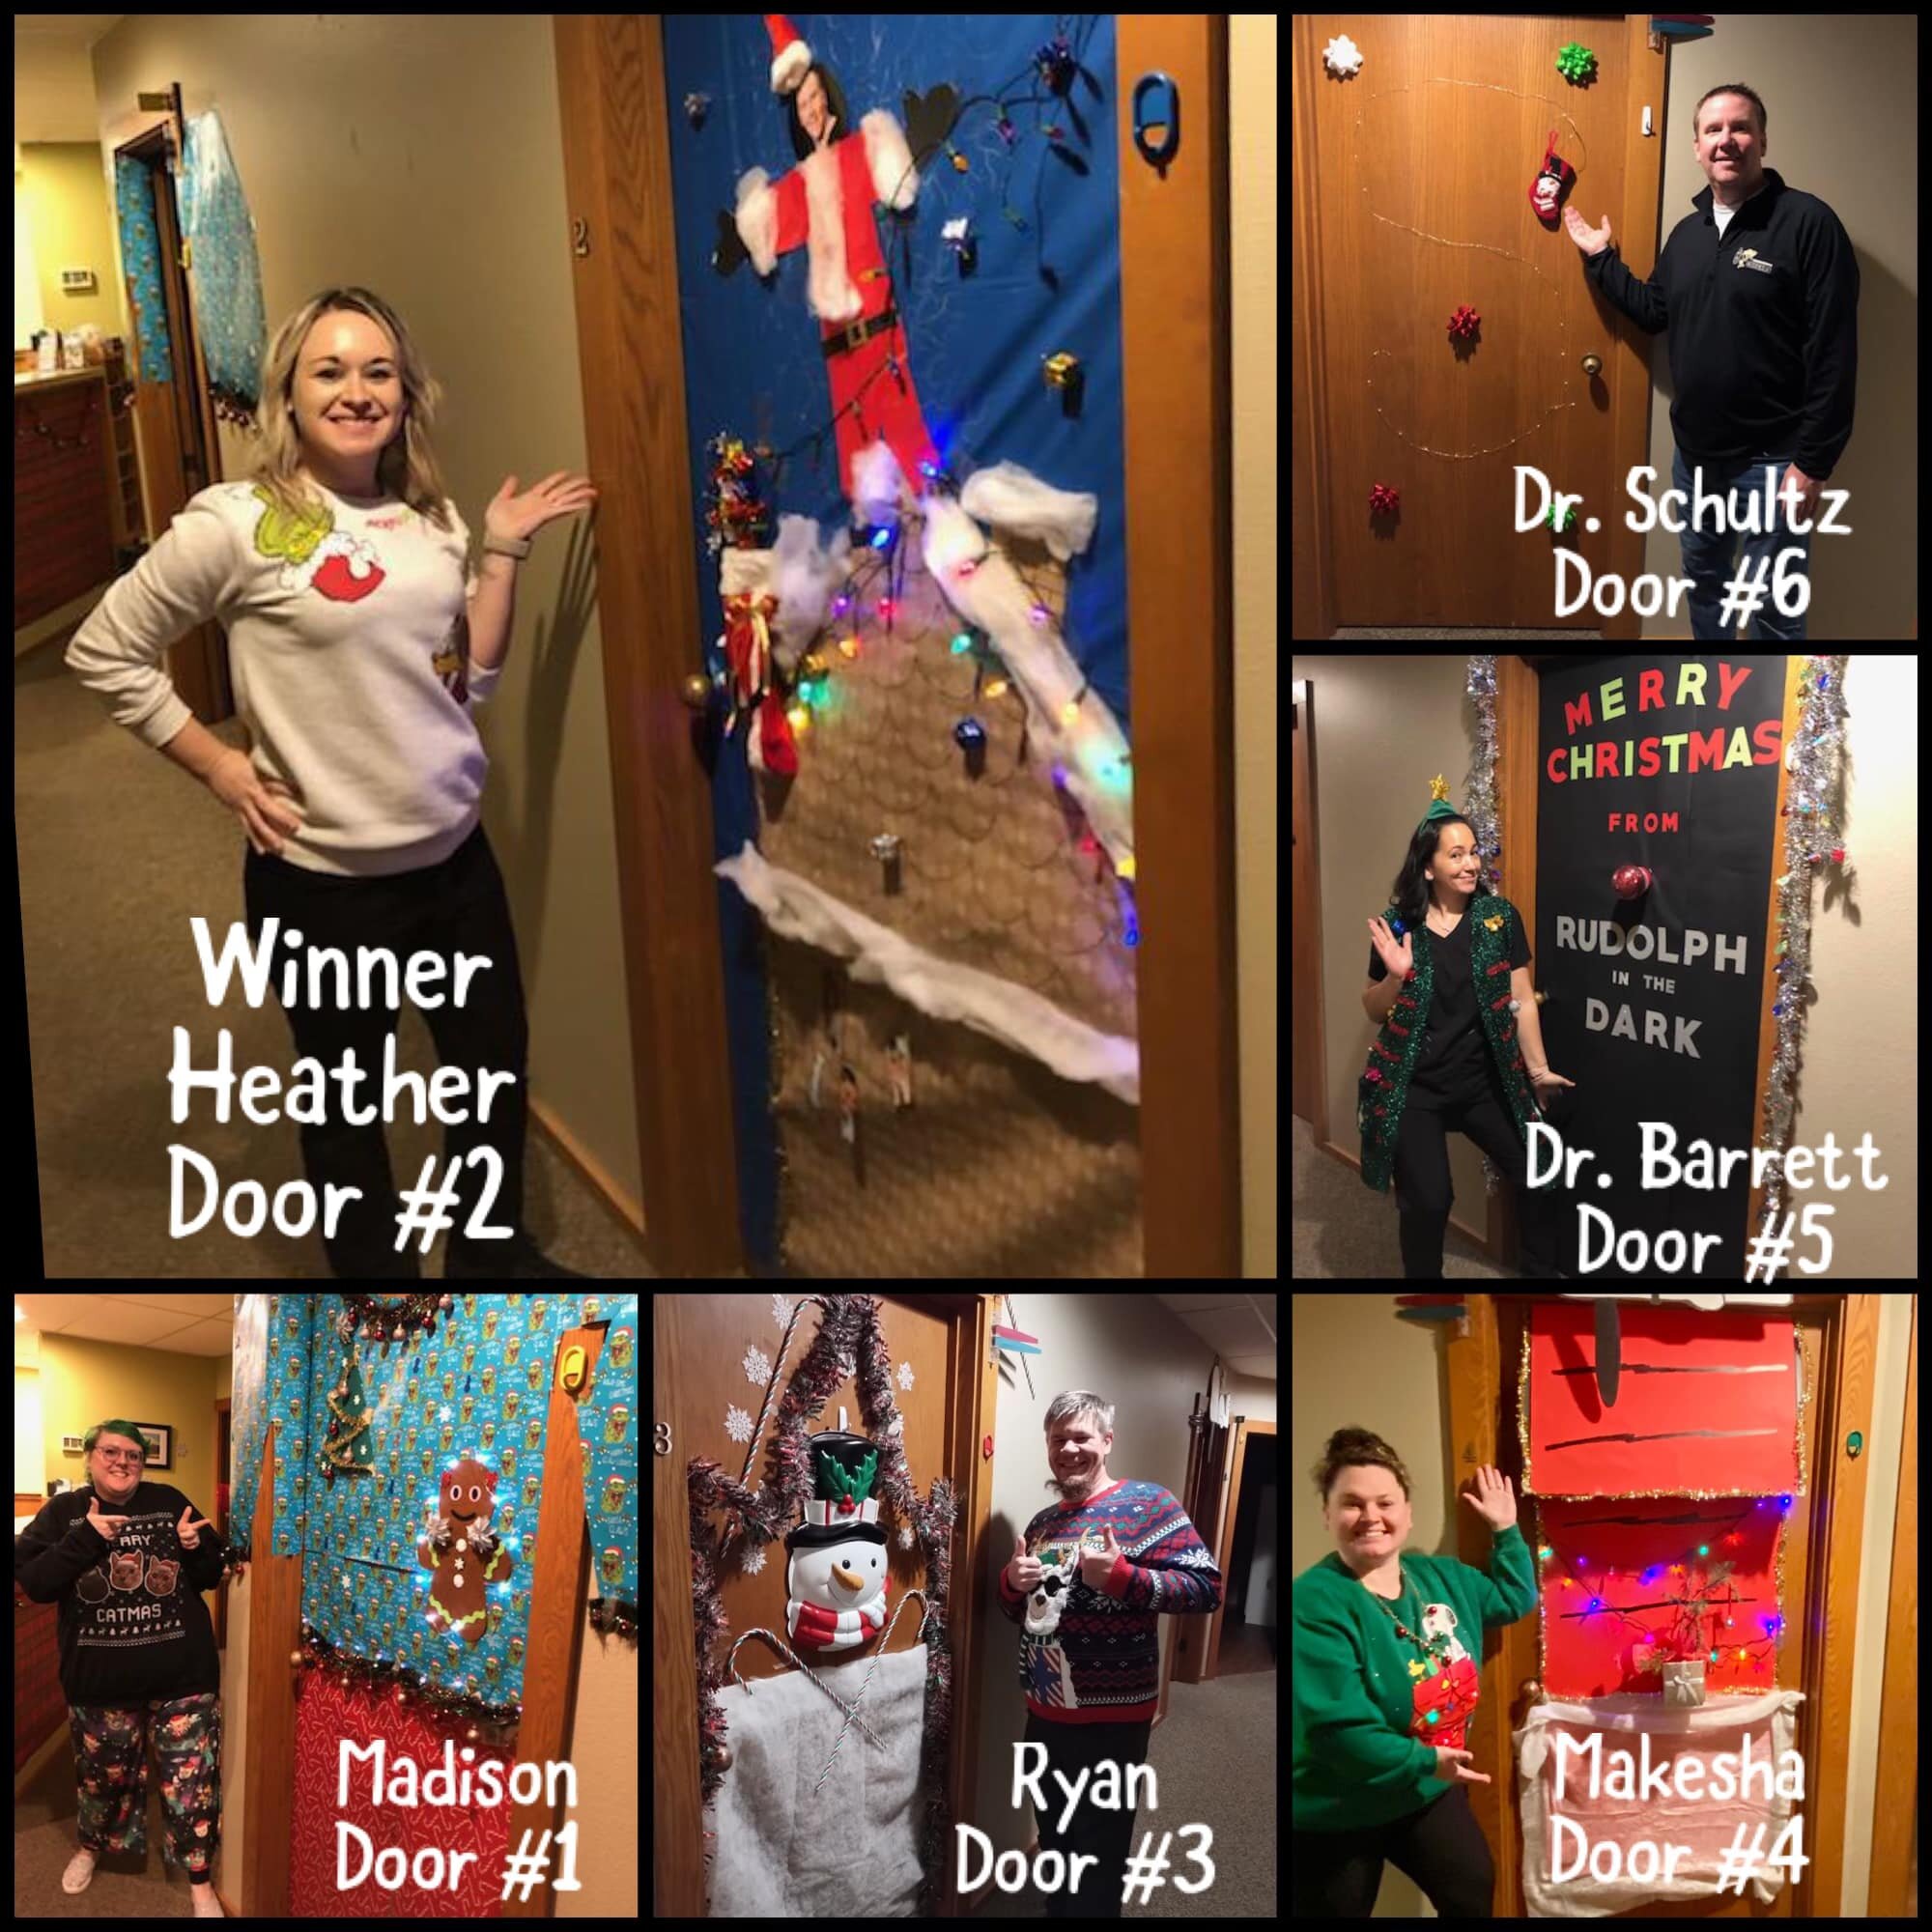 Congratulations, Heather! 🥇 
Your door was the voters choice and has secured the prestigious first place position. Thank you to everyone who participated, we understand that it must have been a tough choice. Heather, enjoy your well-deserved victory